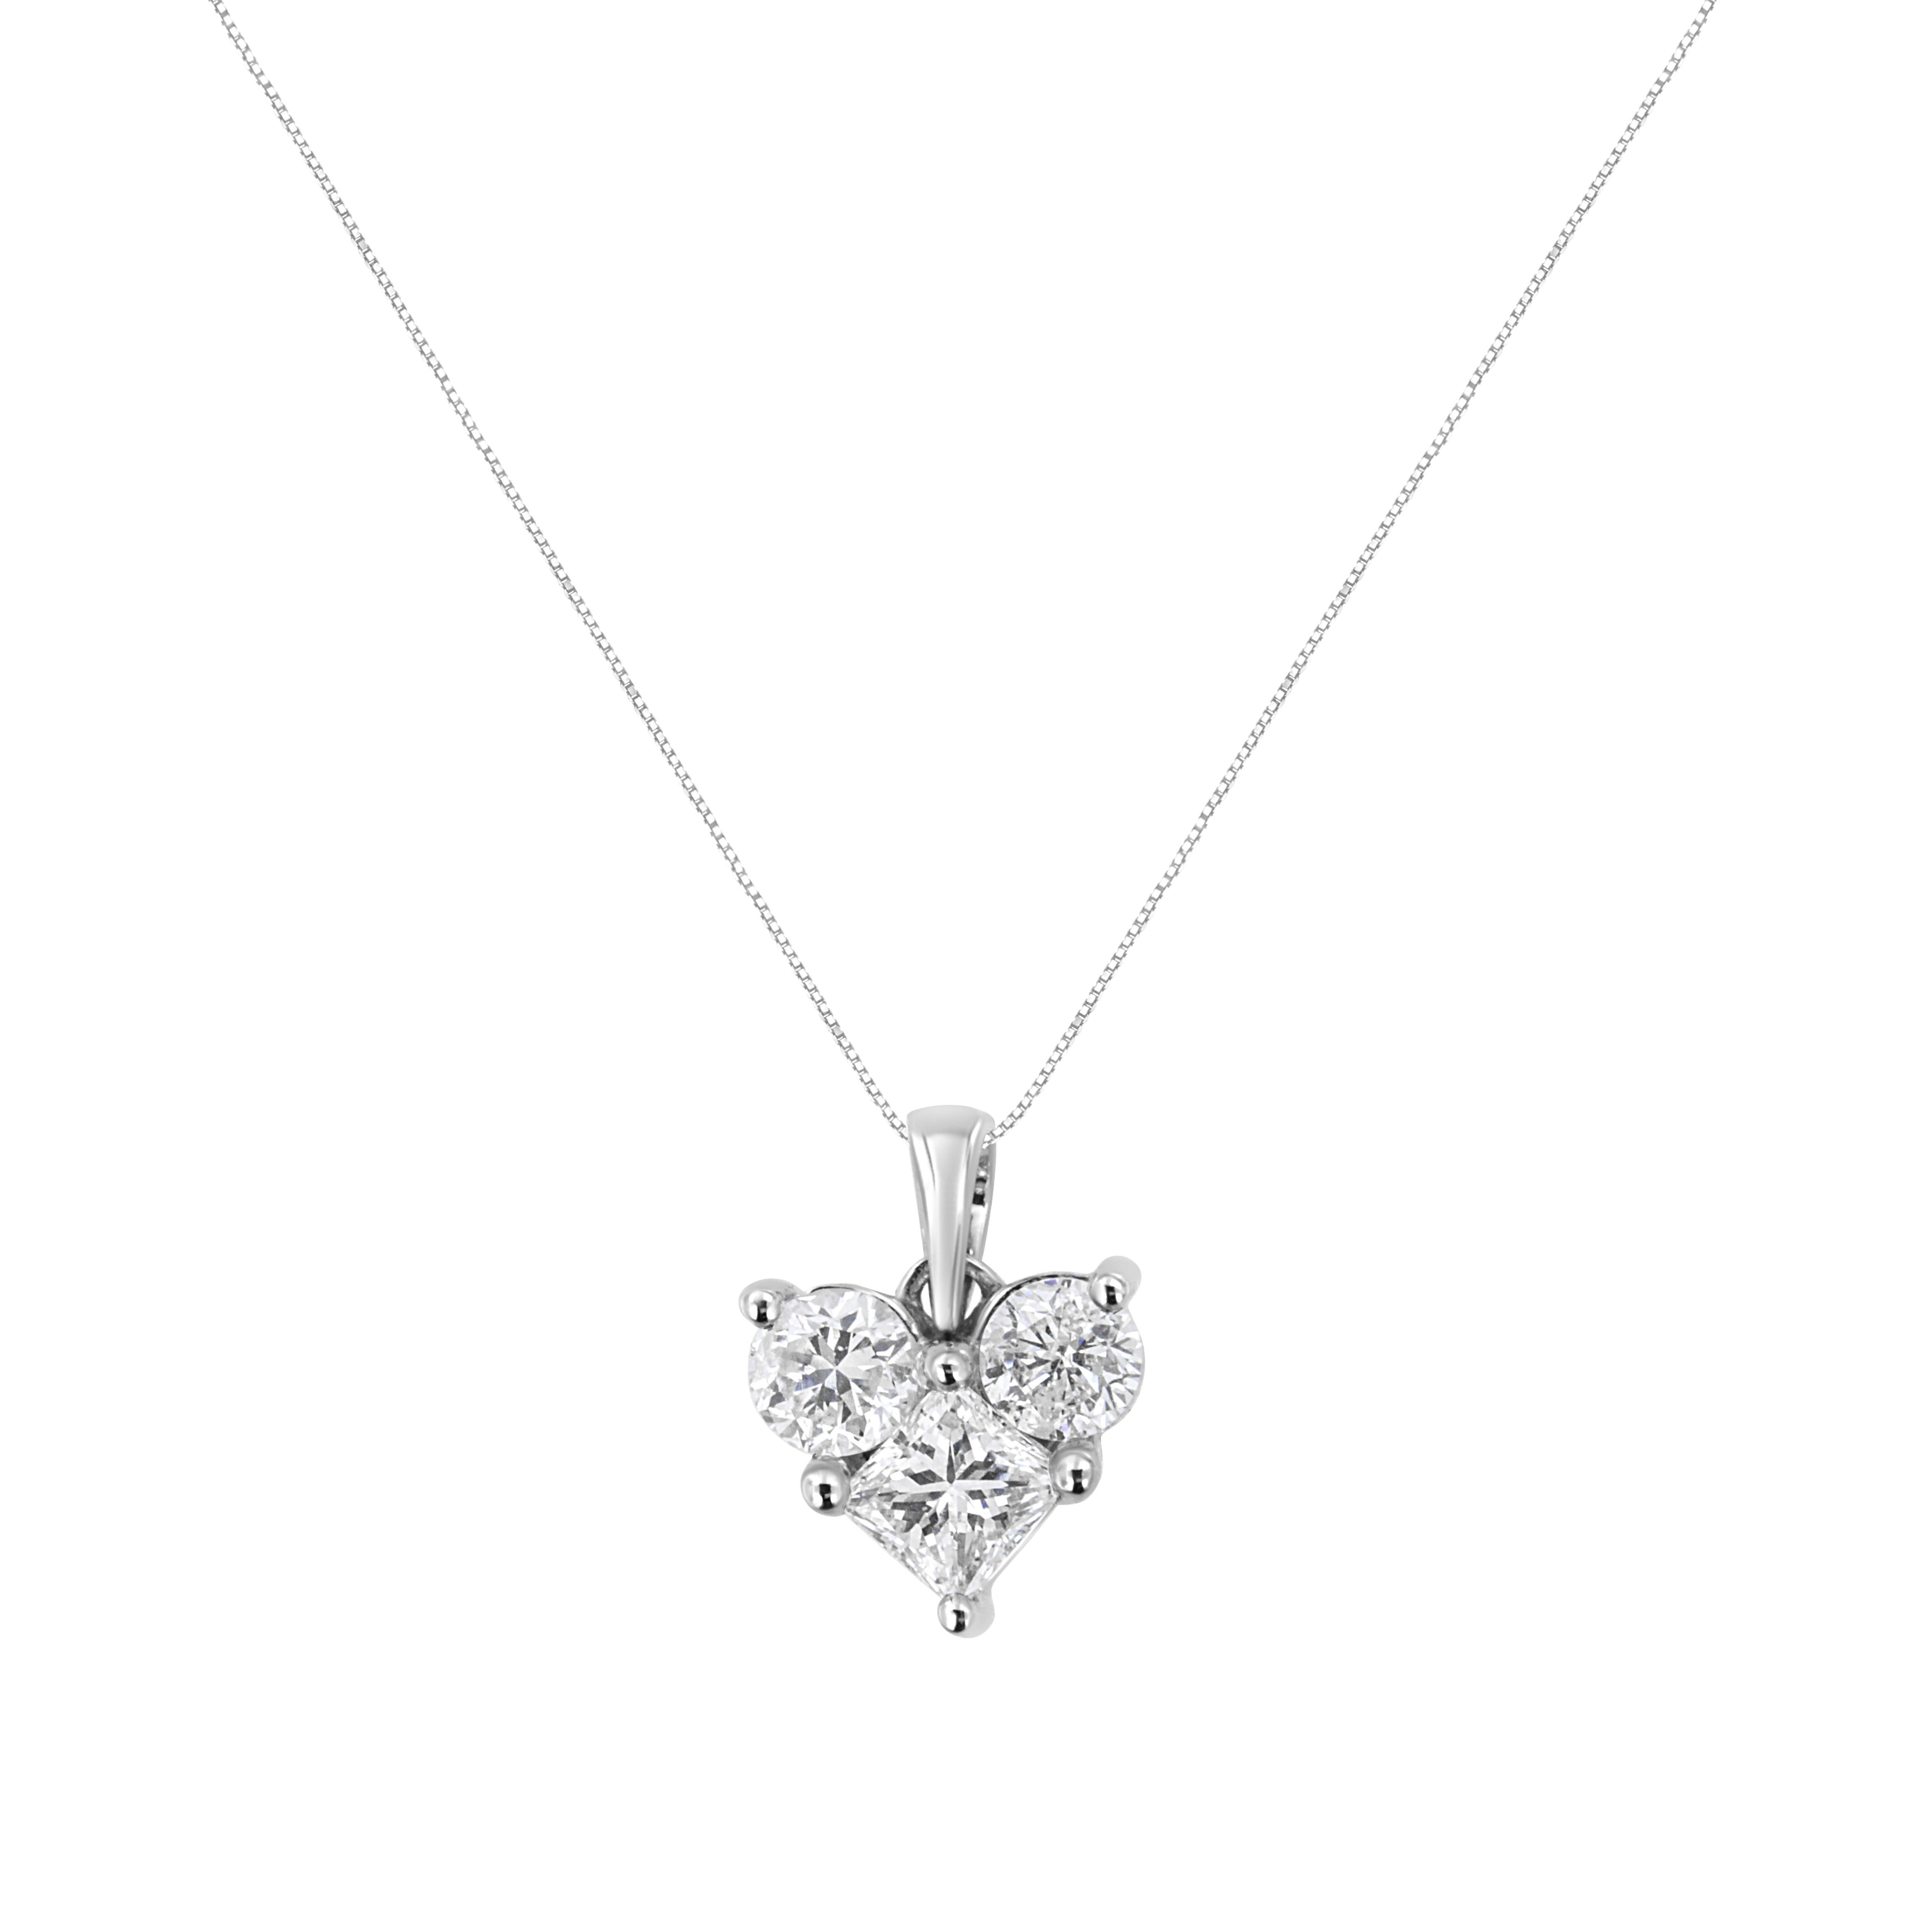 A story of pure elegance, these glamorous pendant showcases brilliant natural diamonds that are set in enduring 10k white gold. A magical look she'll turn to often, this necklace is designed with two round-cut diamonds and one princess-cut diamond